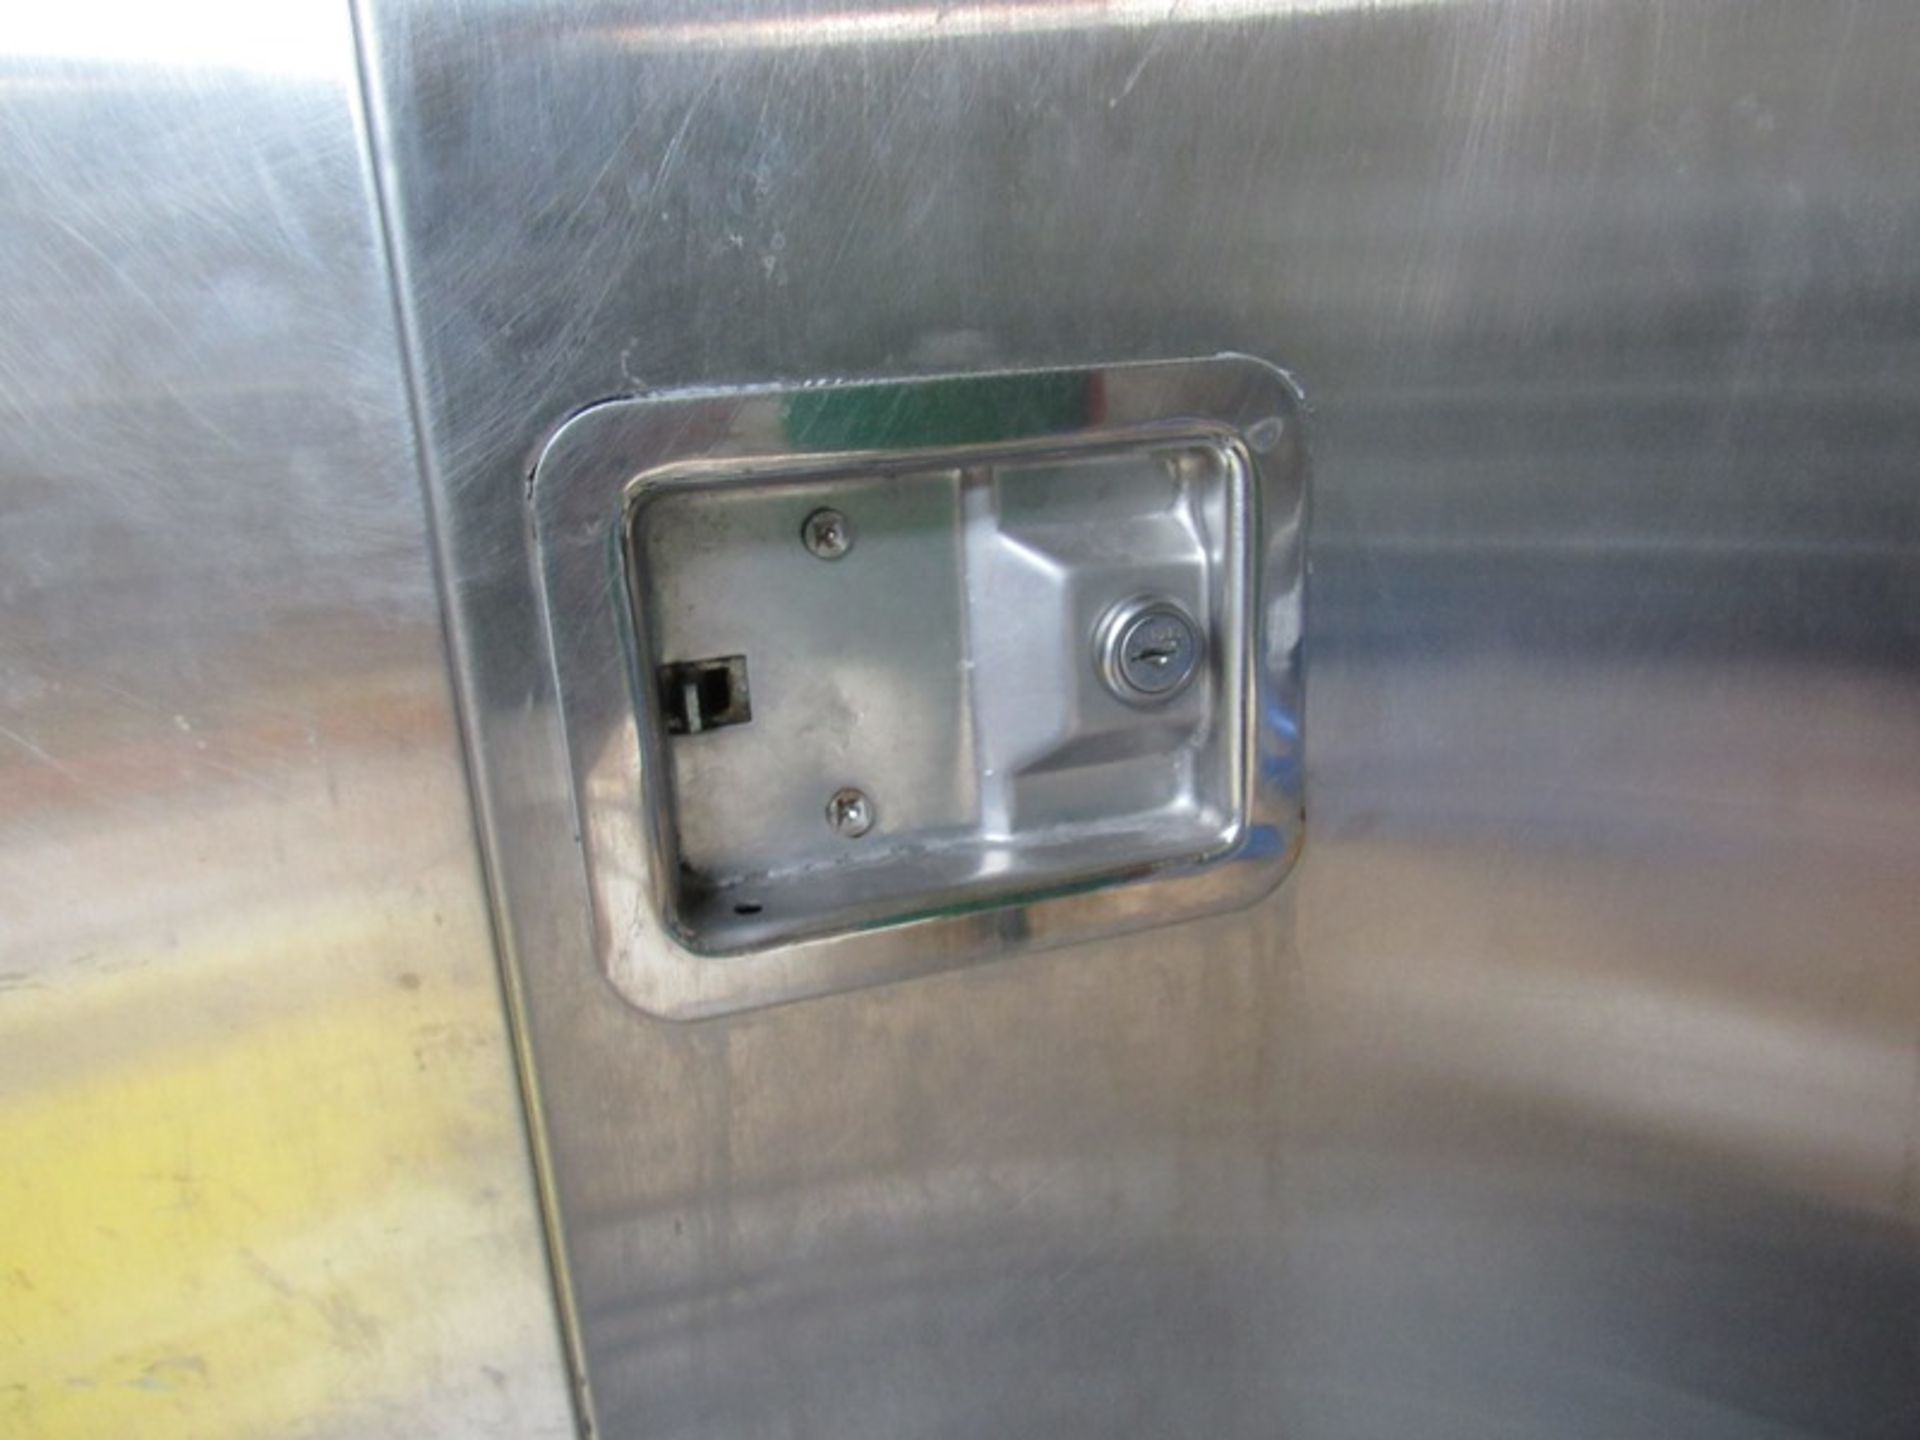 Jamco Stainless Steel Cabinet, 36" W X 18" D X 5' T on stand and contents, broken latch (Required - Image 3 of 3